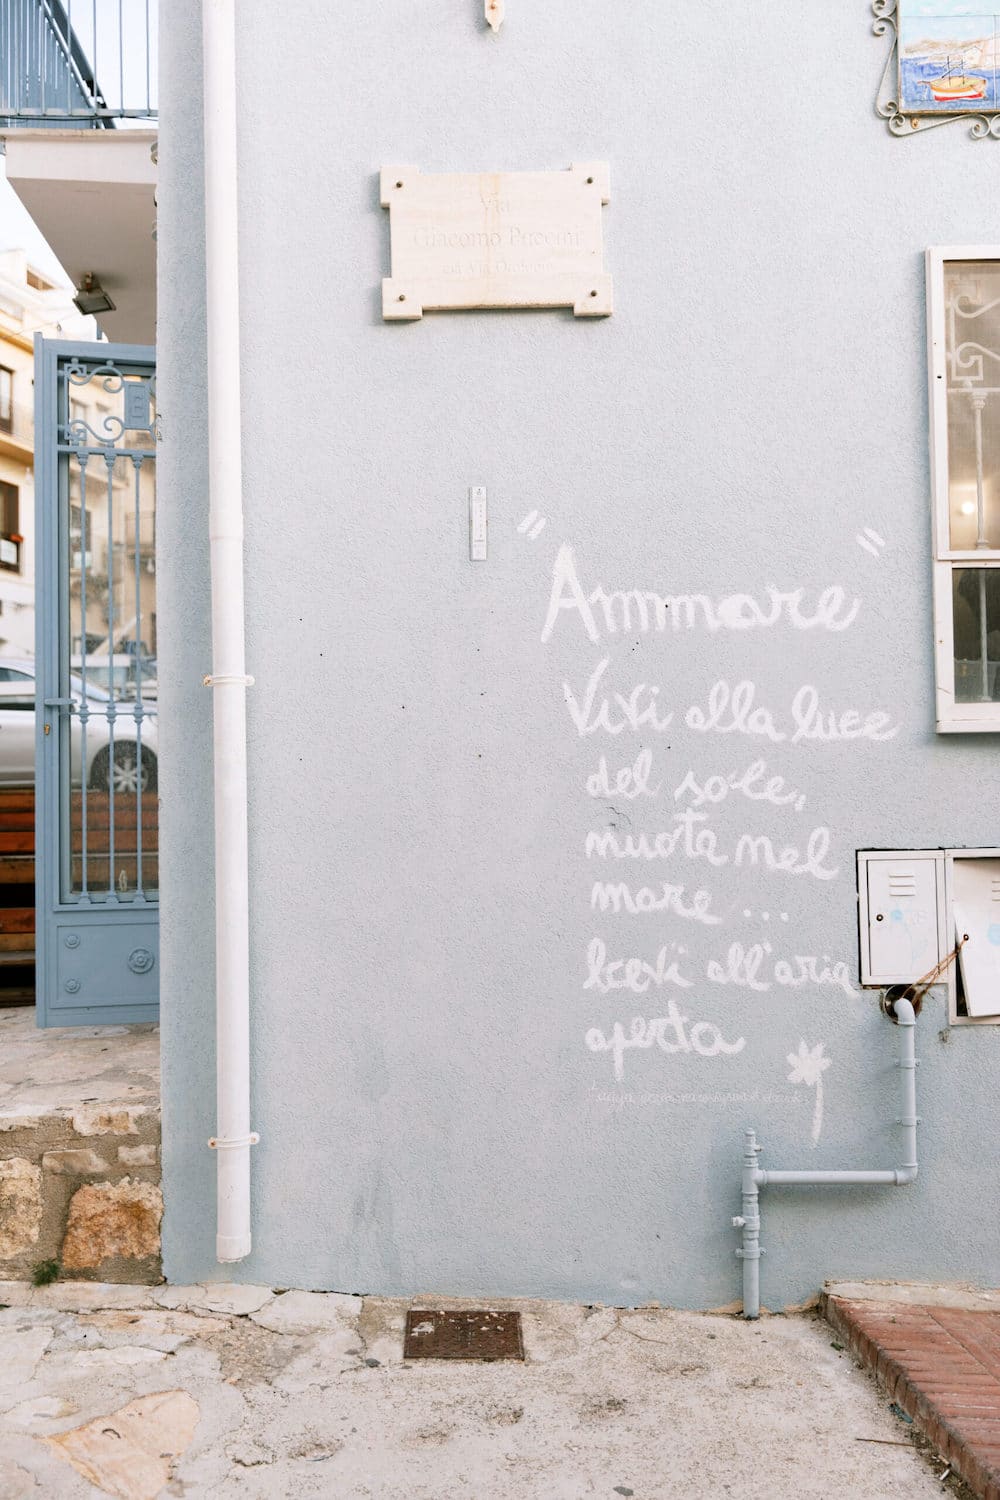 White painted Italian quote on a blue wall expressing love and life's simple joys, symbolizing the essence of short spiritual quotes for healing and strength.